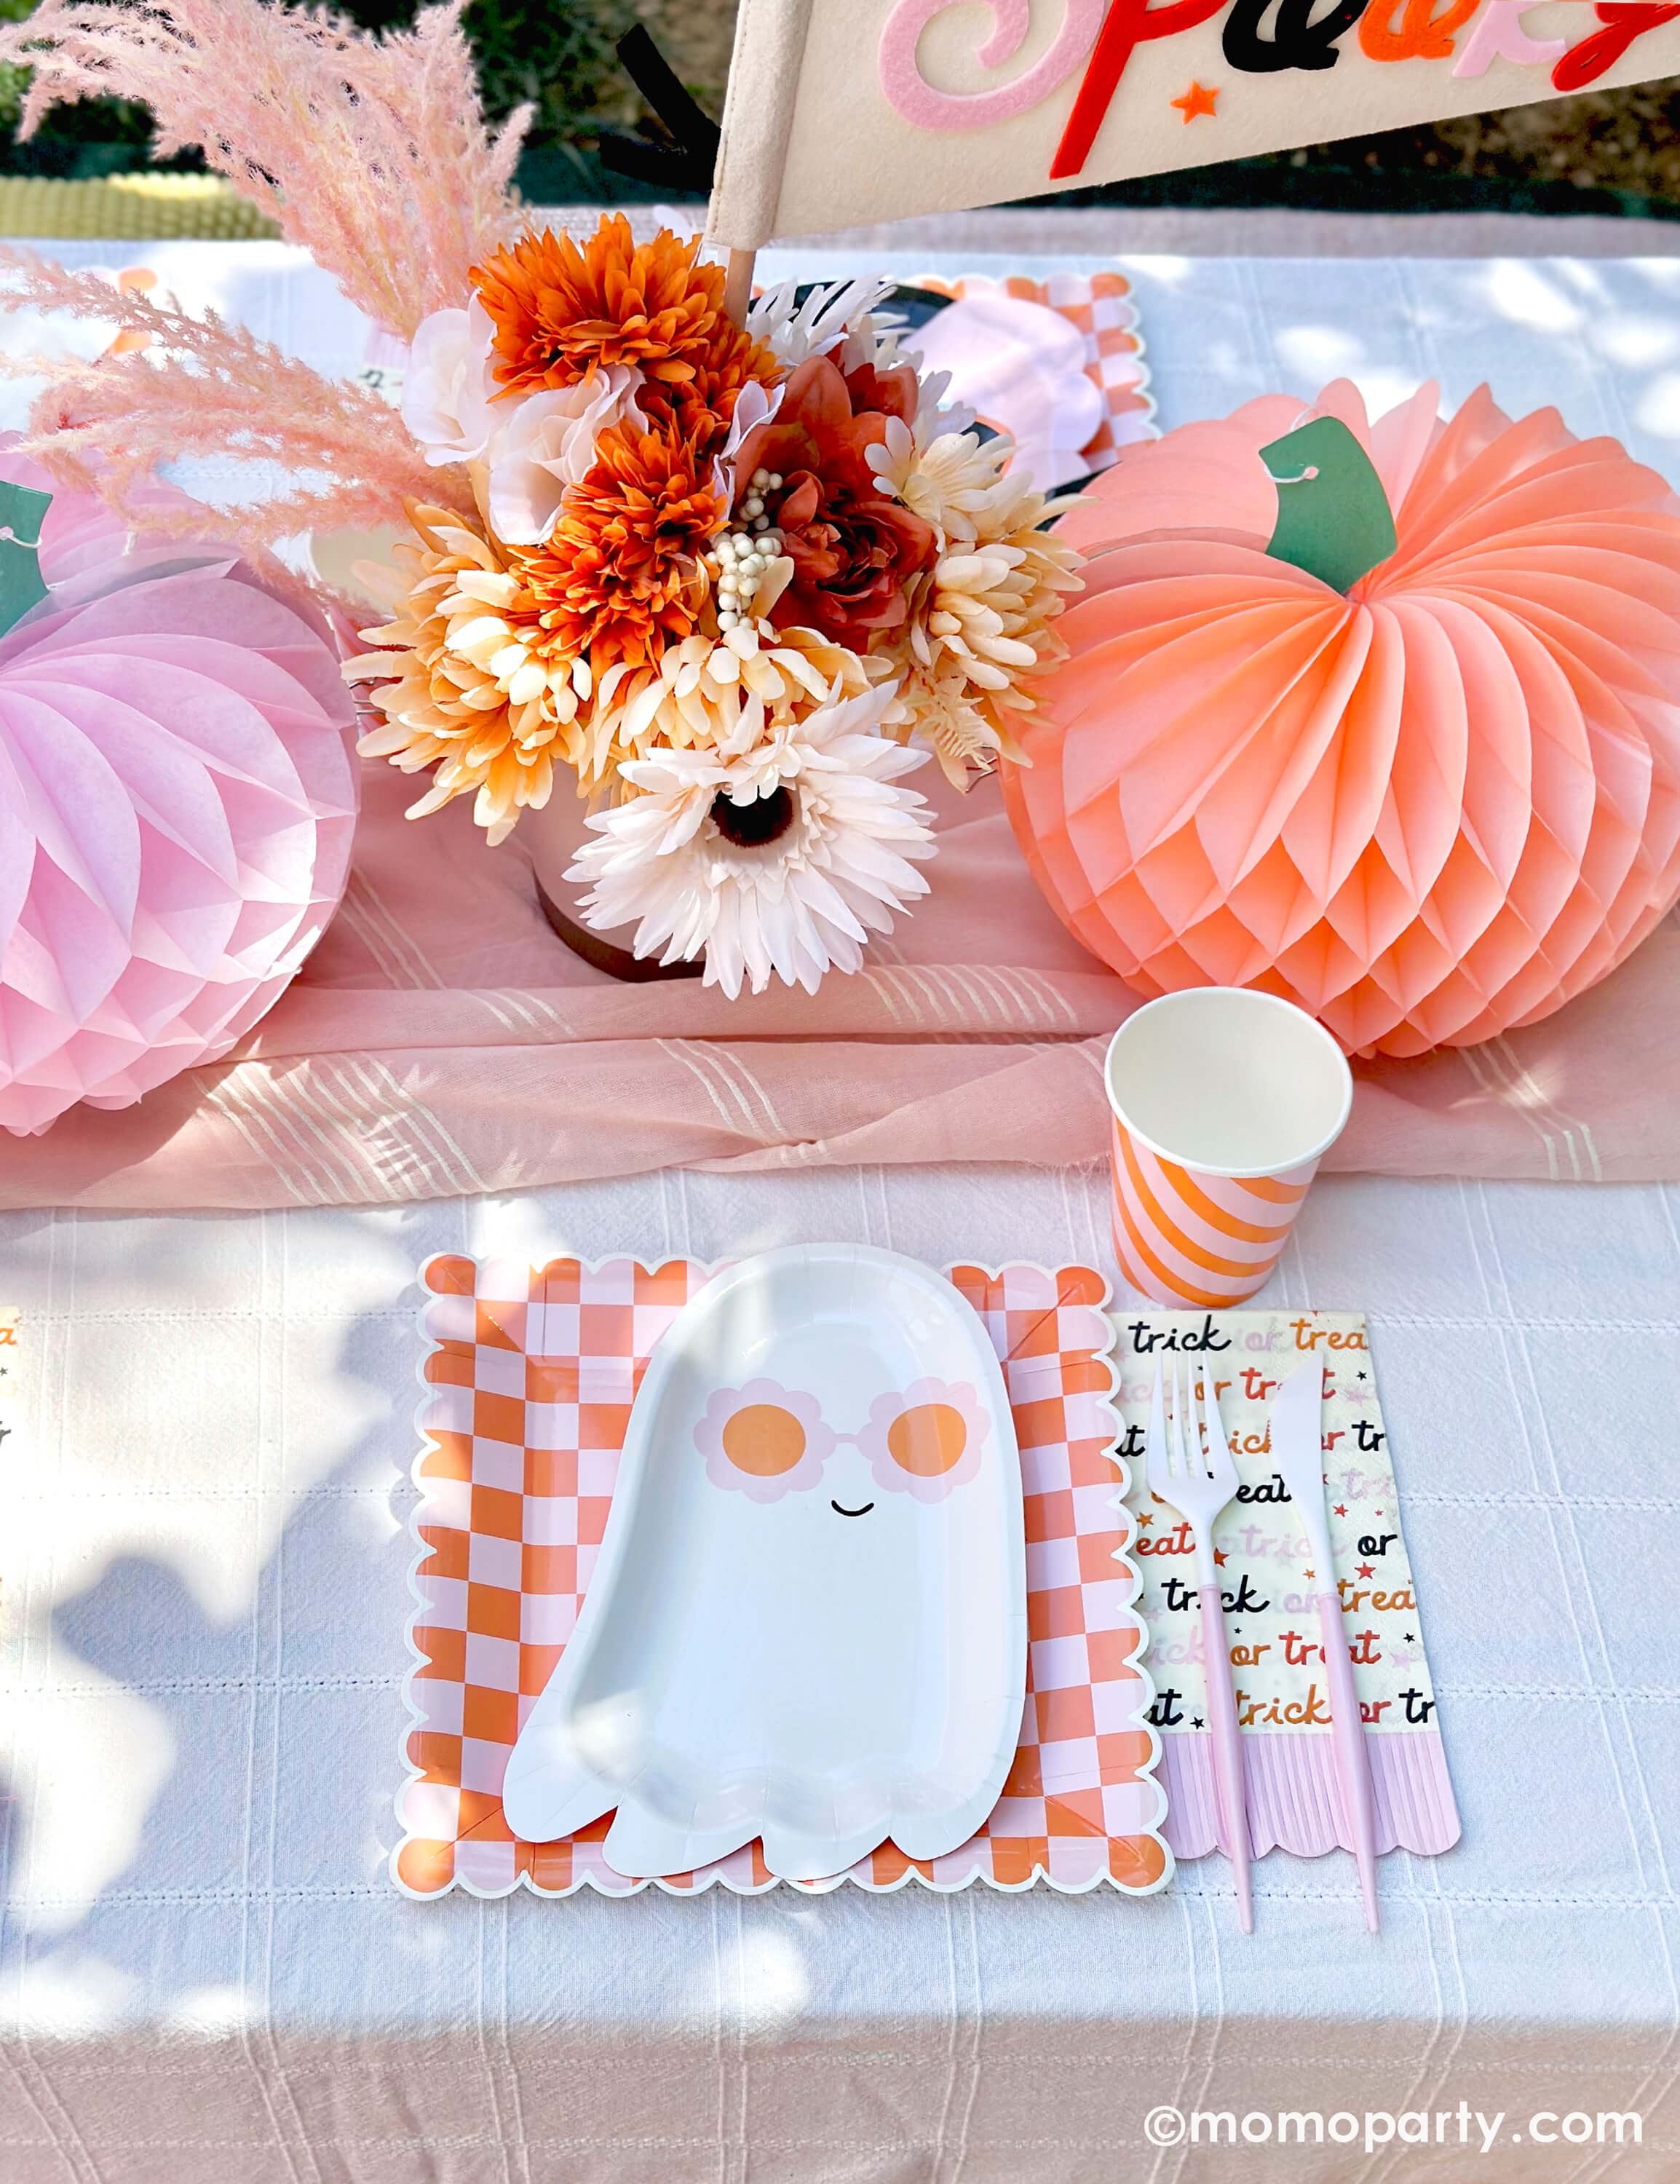 A pink Halloween table featuring Momo Party's pink sunny ghost shaped plates paired with orange/pink checkered plates, with boho vibe fall flower arrangement and pastel peach and pink honeycomb pumpkins as the centerpiece, this tablescape gives a great inspiration for a modern and chic Halloween party table decoration ideas.